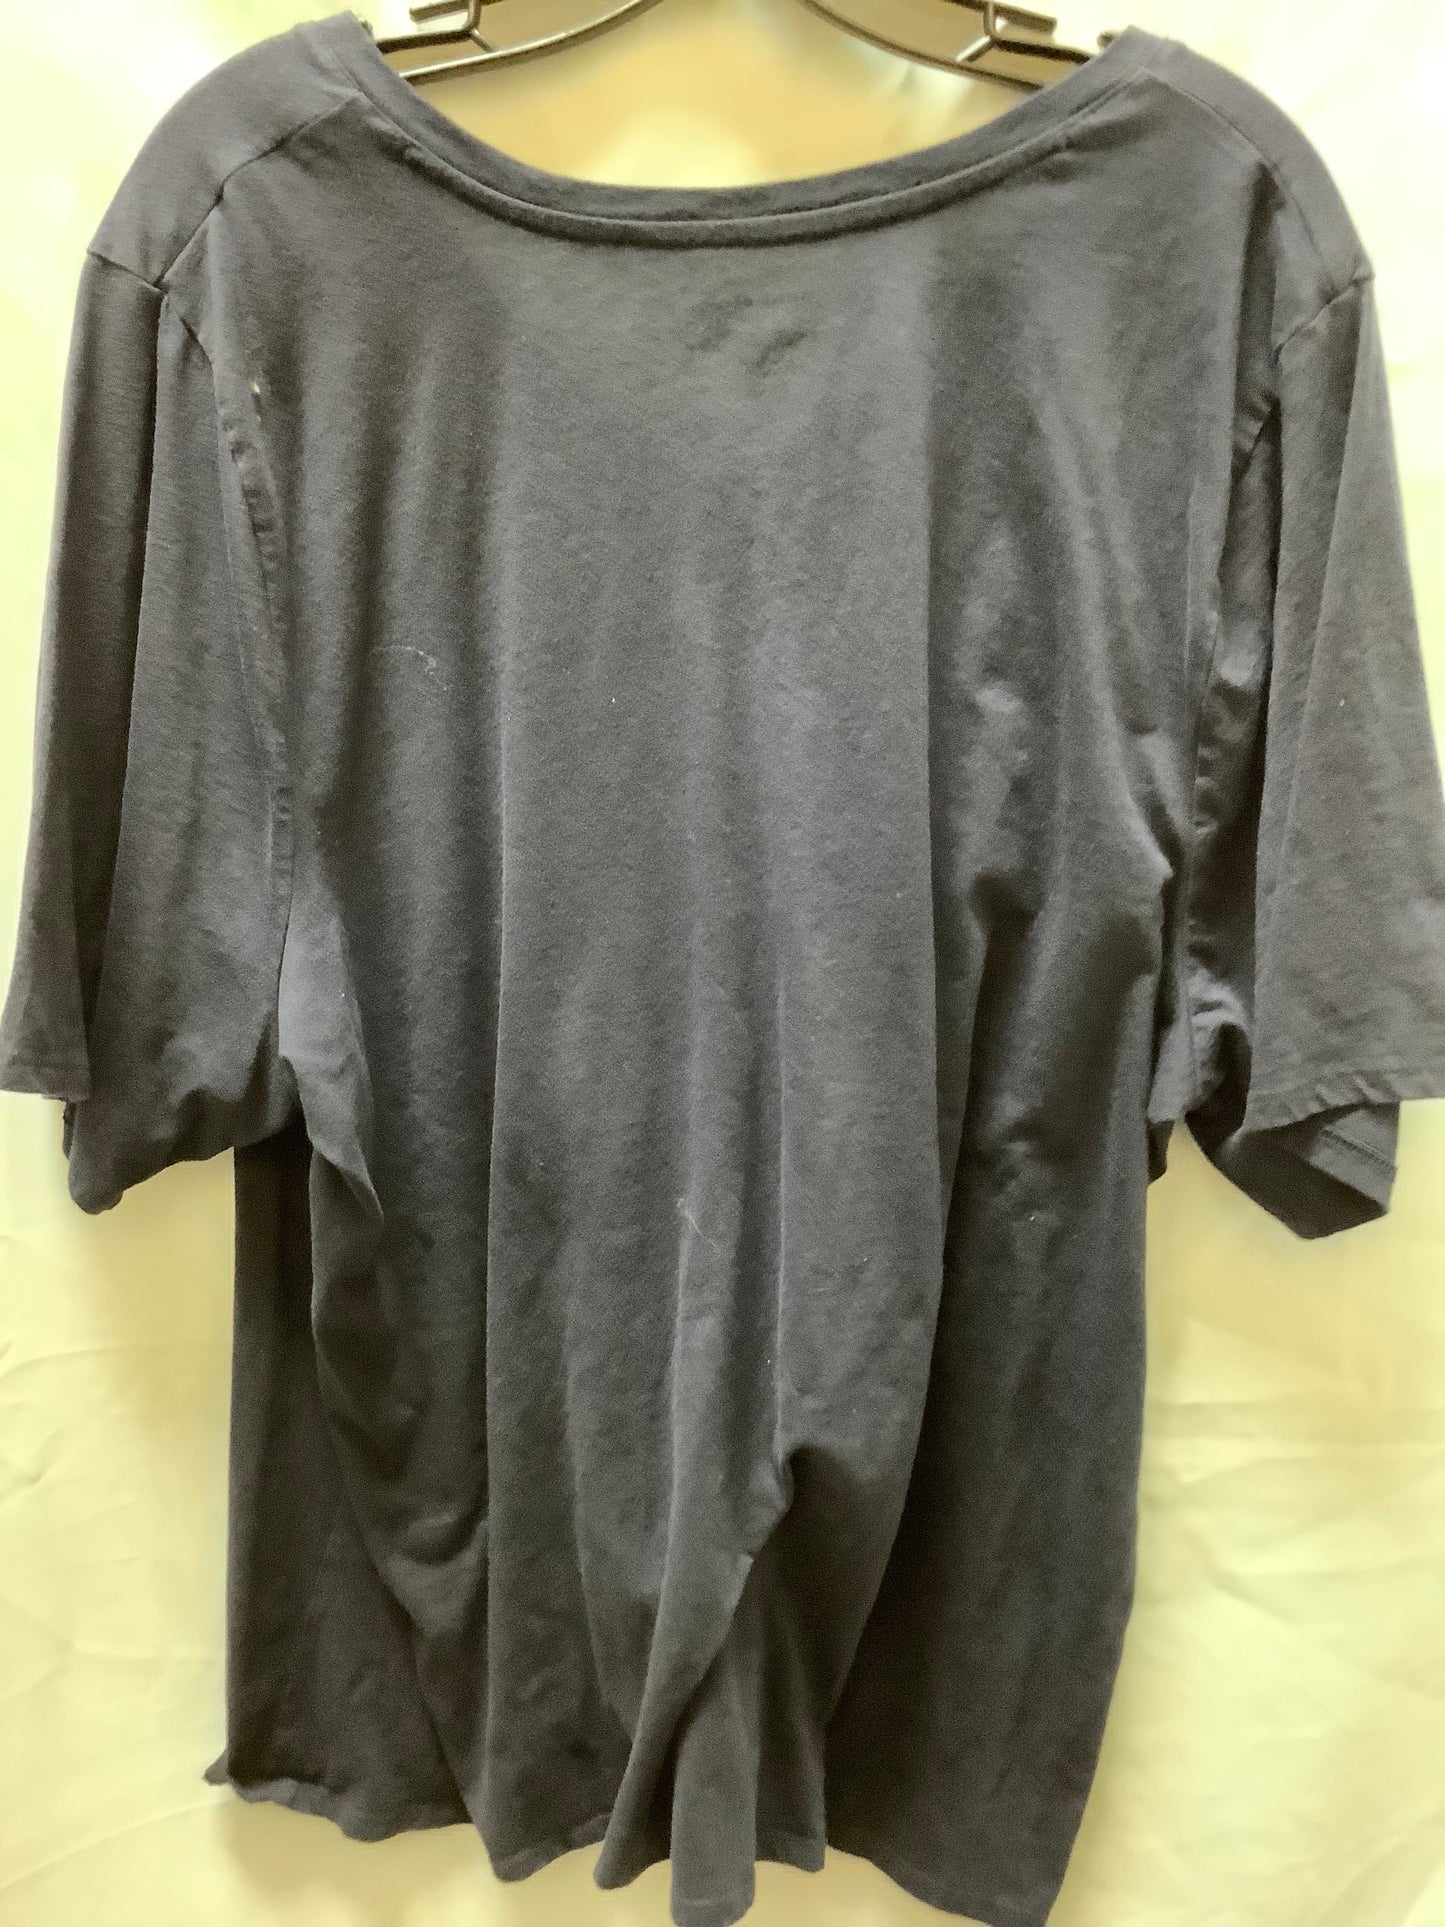 Top Short Sleeve By Lane Bryant  Size: 3x